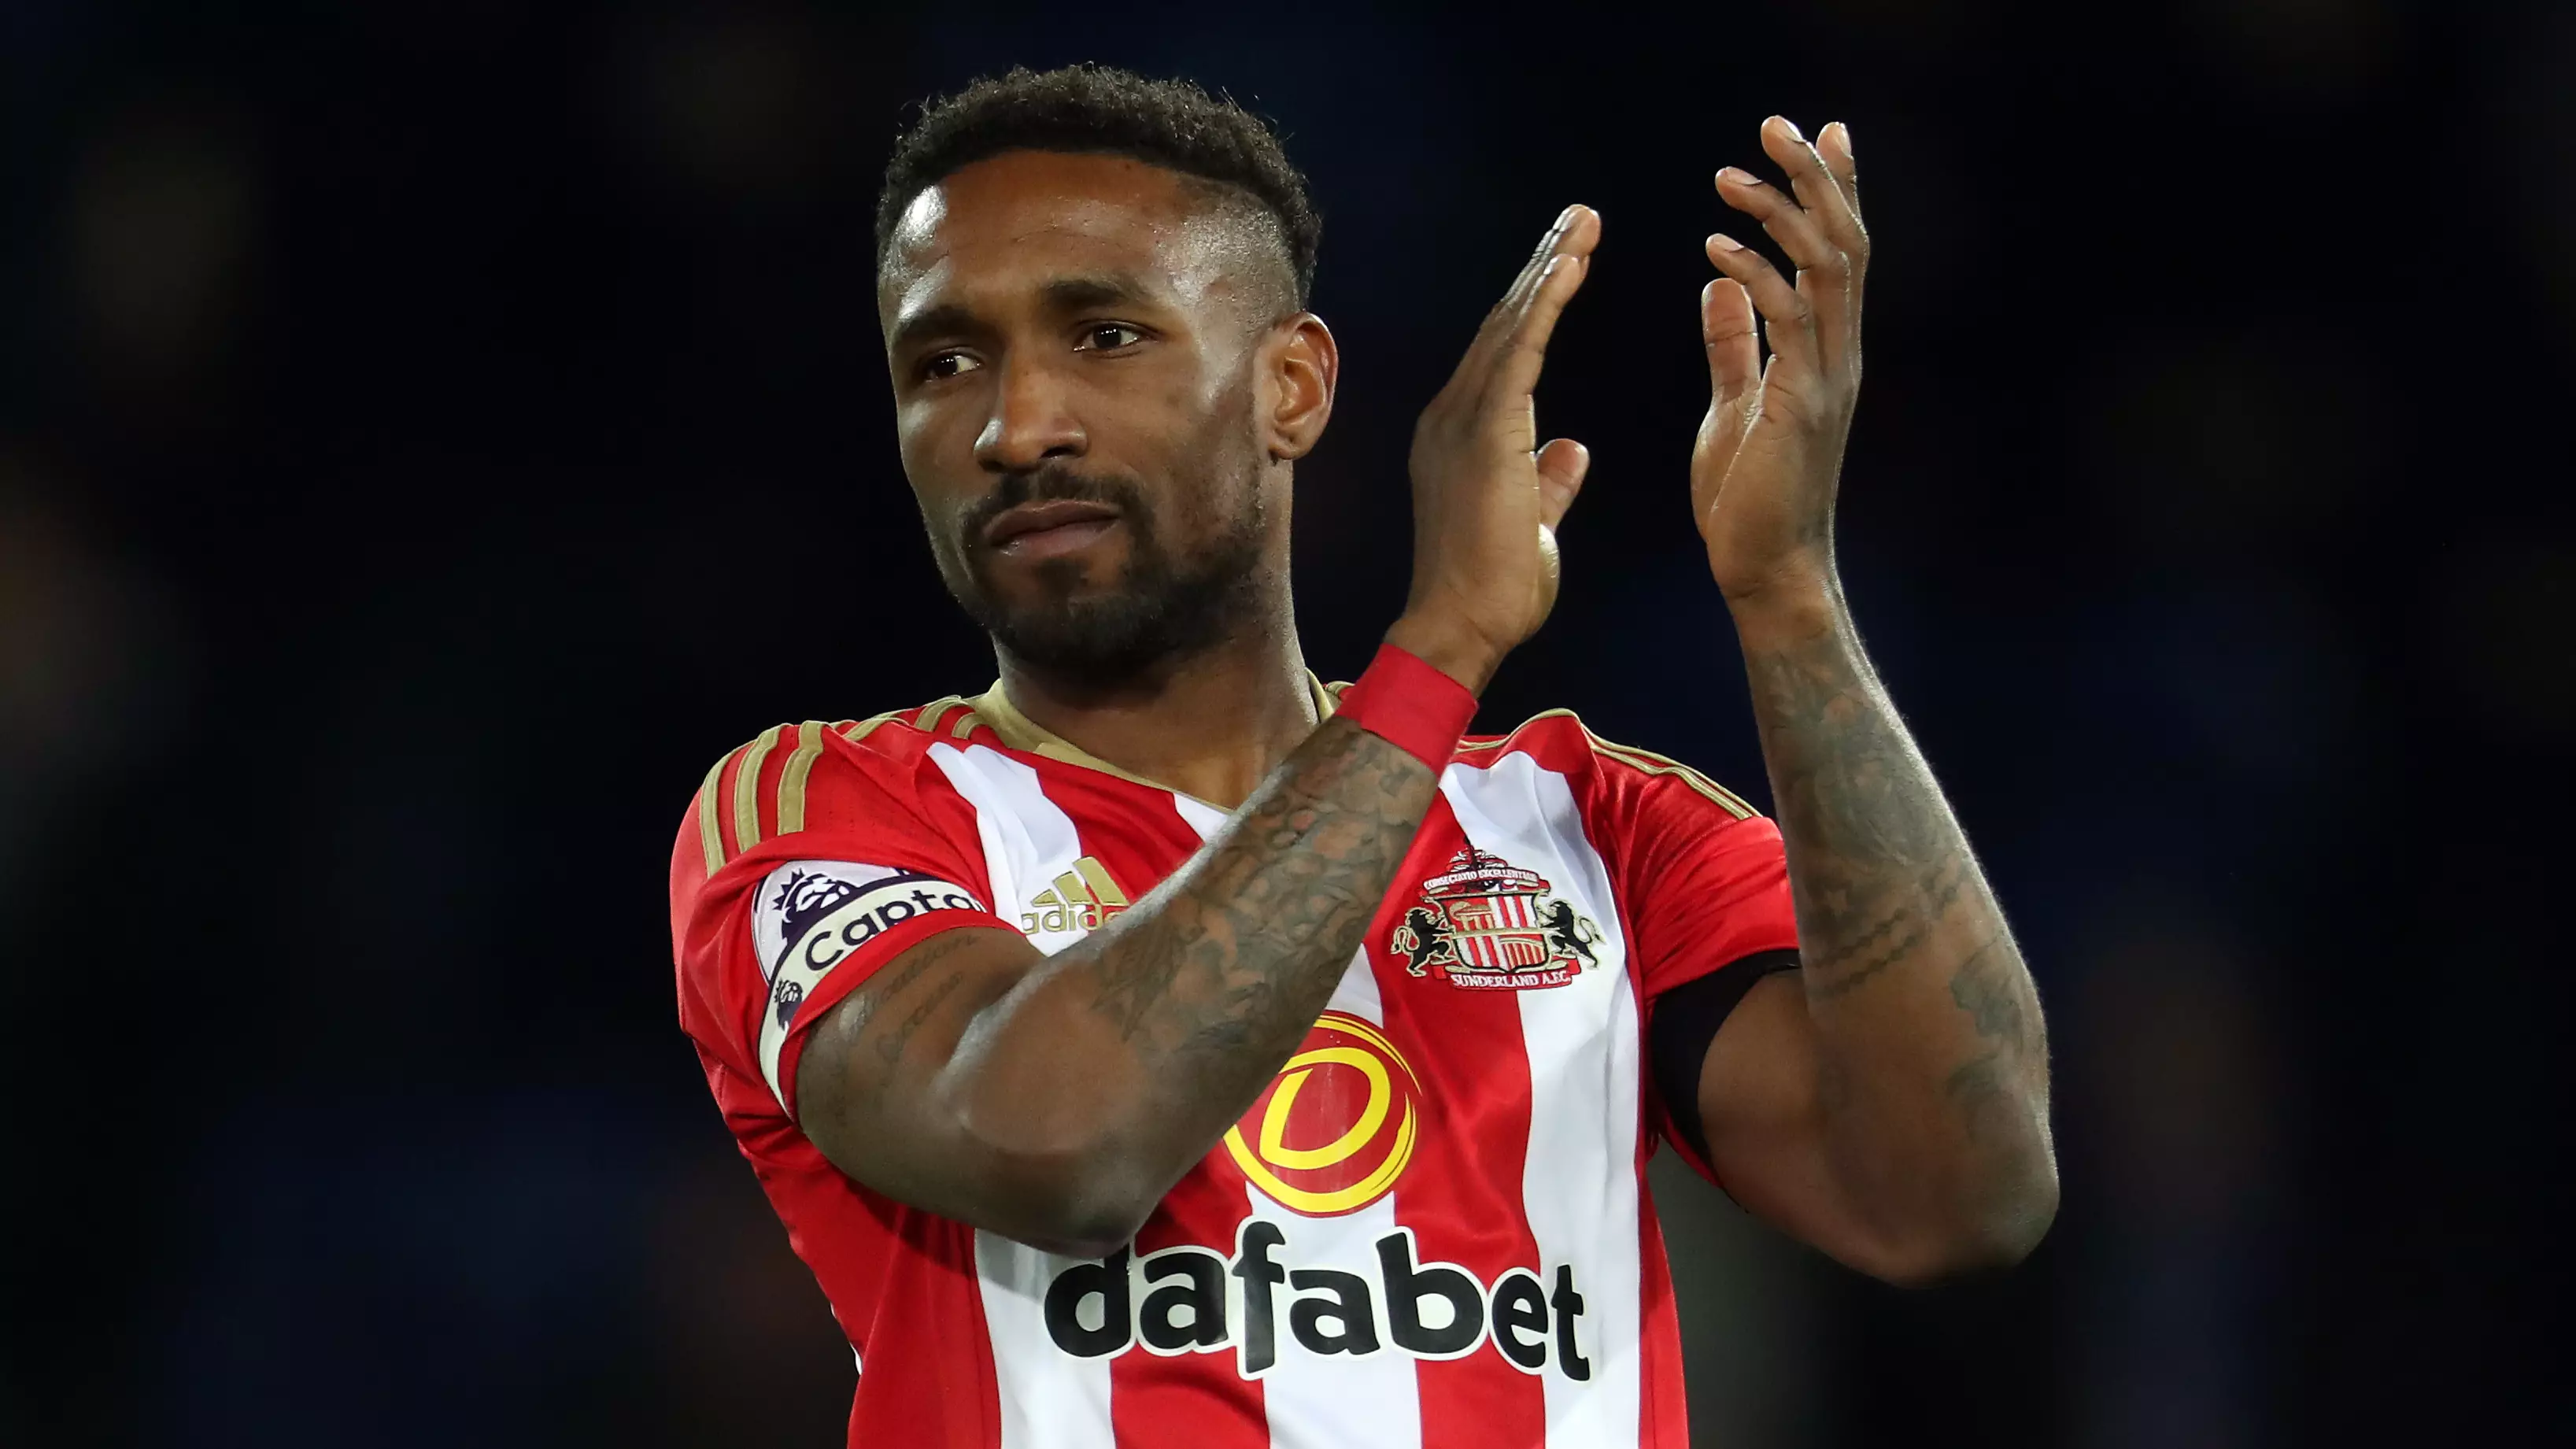 Jermain Defoe Sends Touching Farewell To Sunderland After Bournemouth Transfer